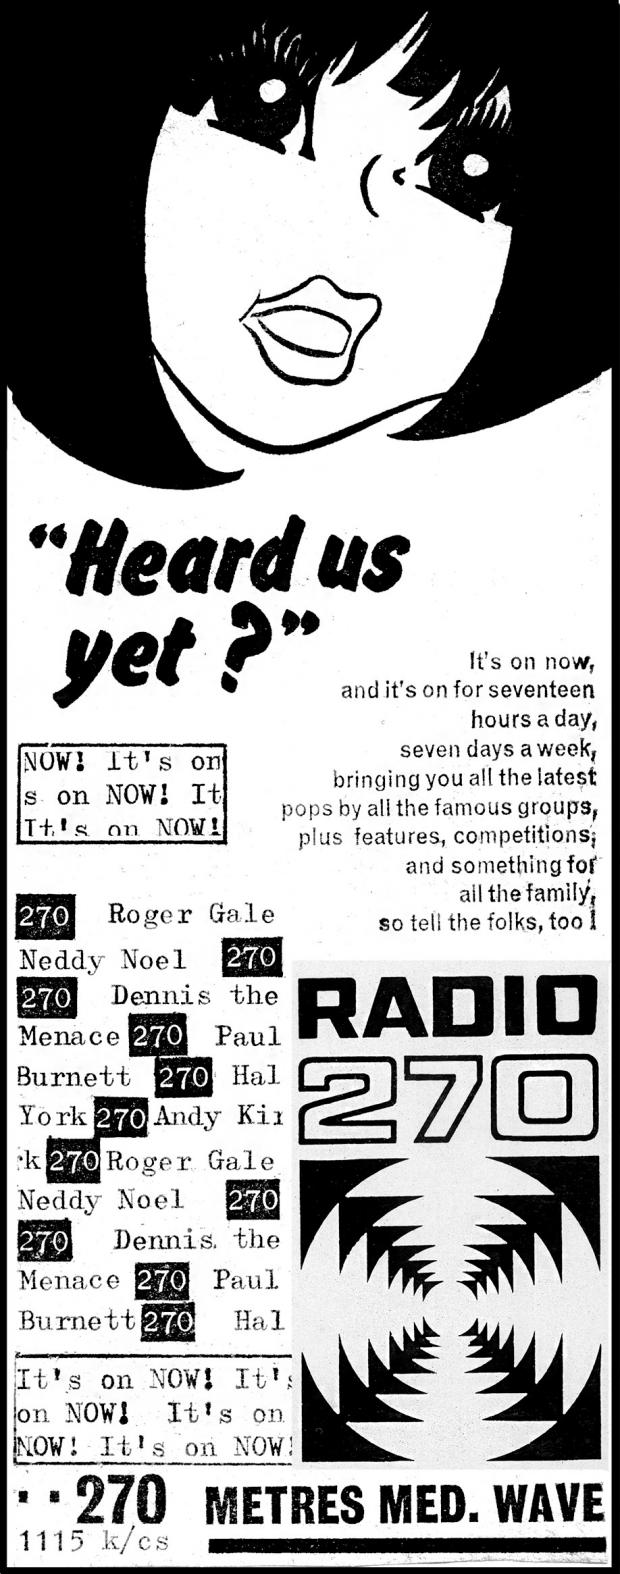 Isle of Wight County Press: So well-established were the pirates that their adverts appeared in popular magazines and newspapers. Radio 270, rigged by Harry Spencer, advertised heavily. © County Press.